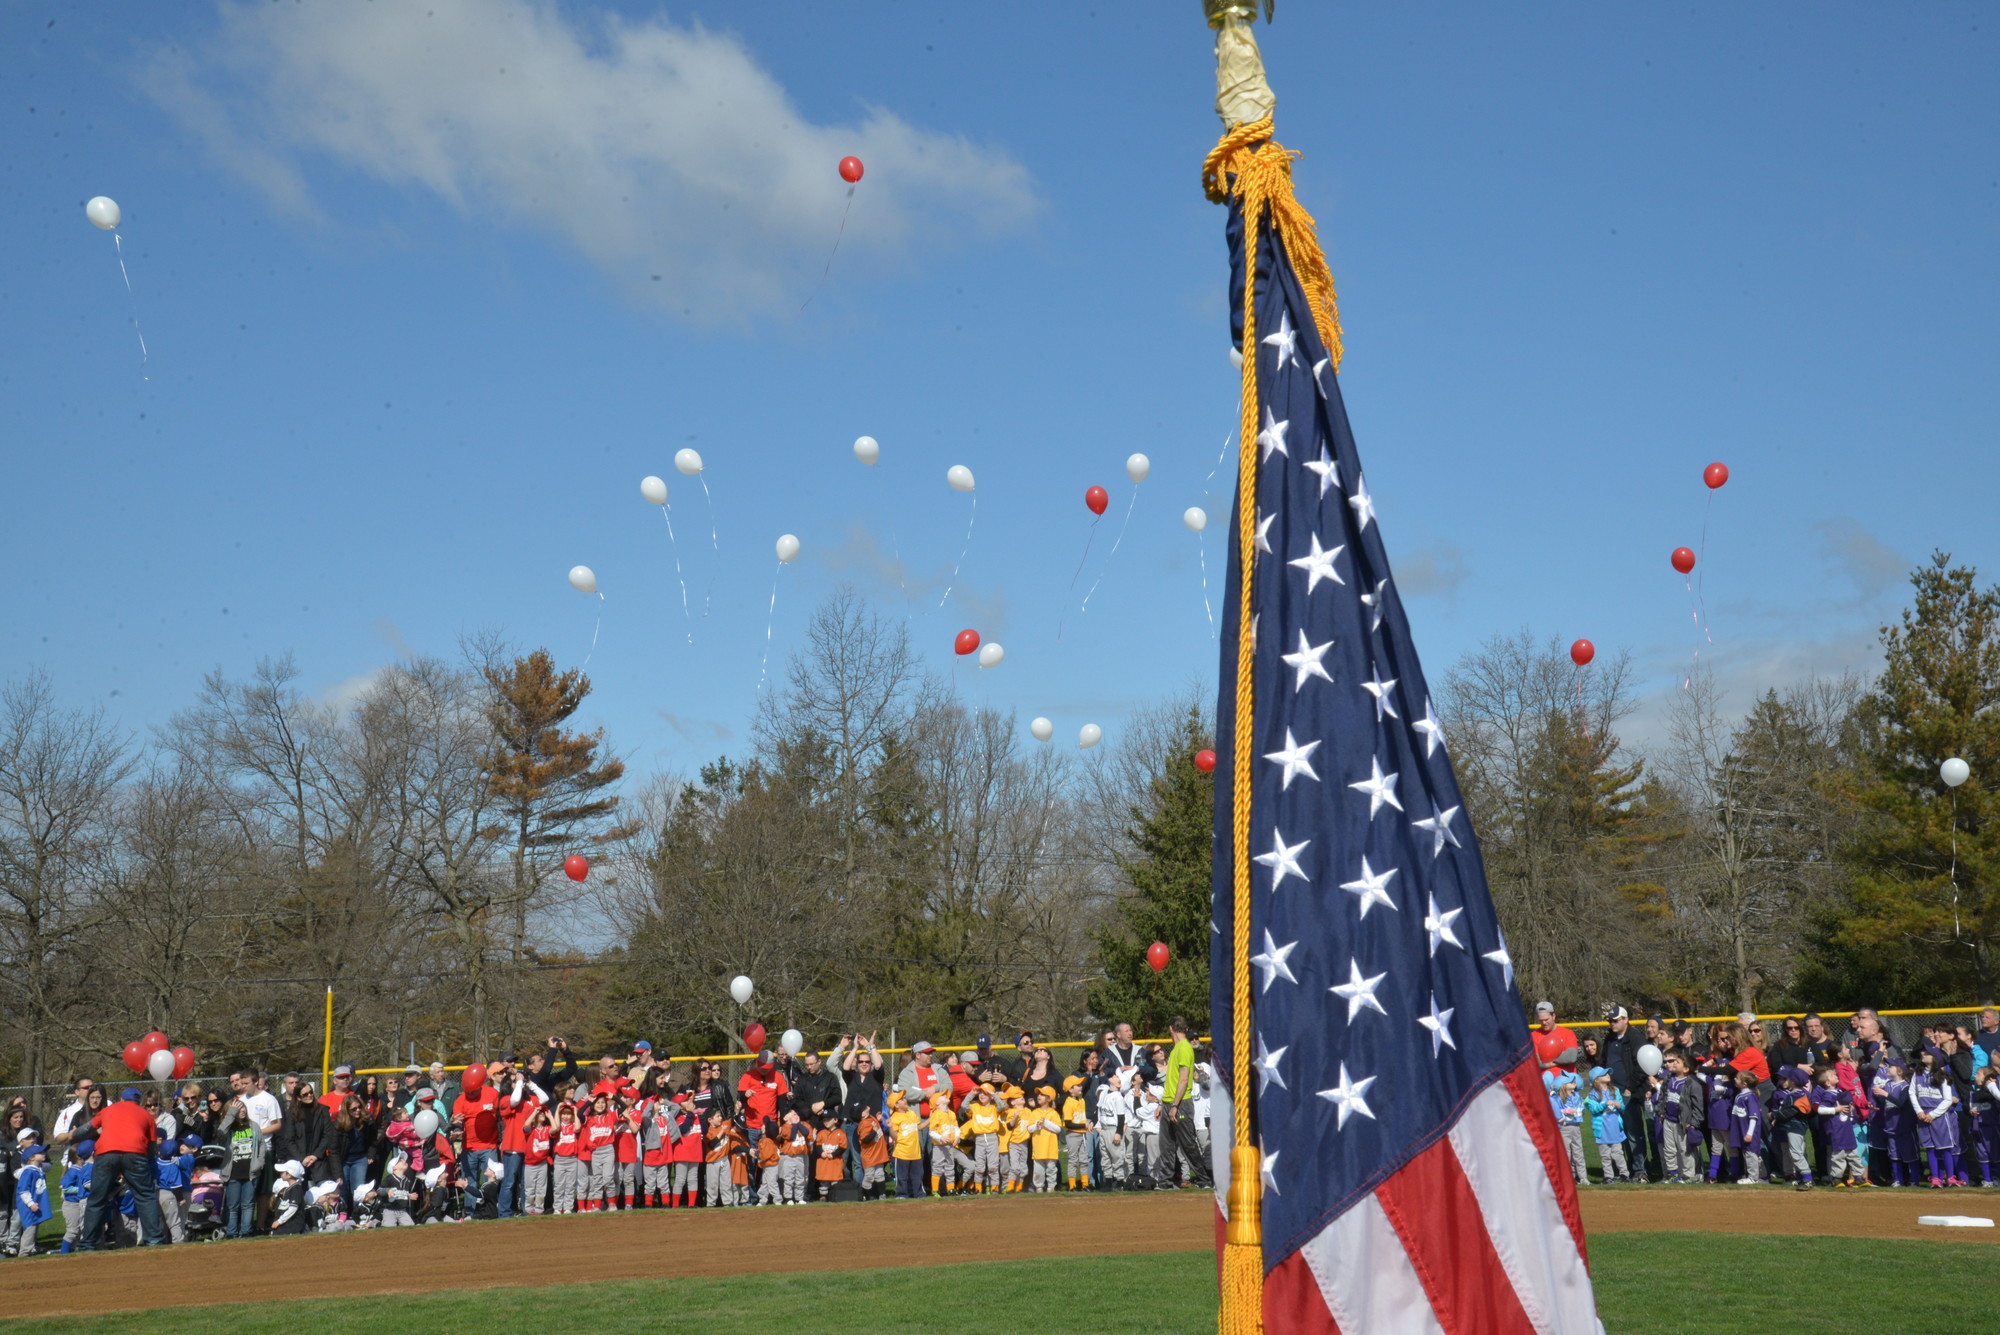 During its annual parade last Saturday, members of the Central Nassau Little League Association released balloons to commemorate Harlie Treanor, a former Little Leaguer who died last July. Story, more photos, page 3.